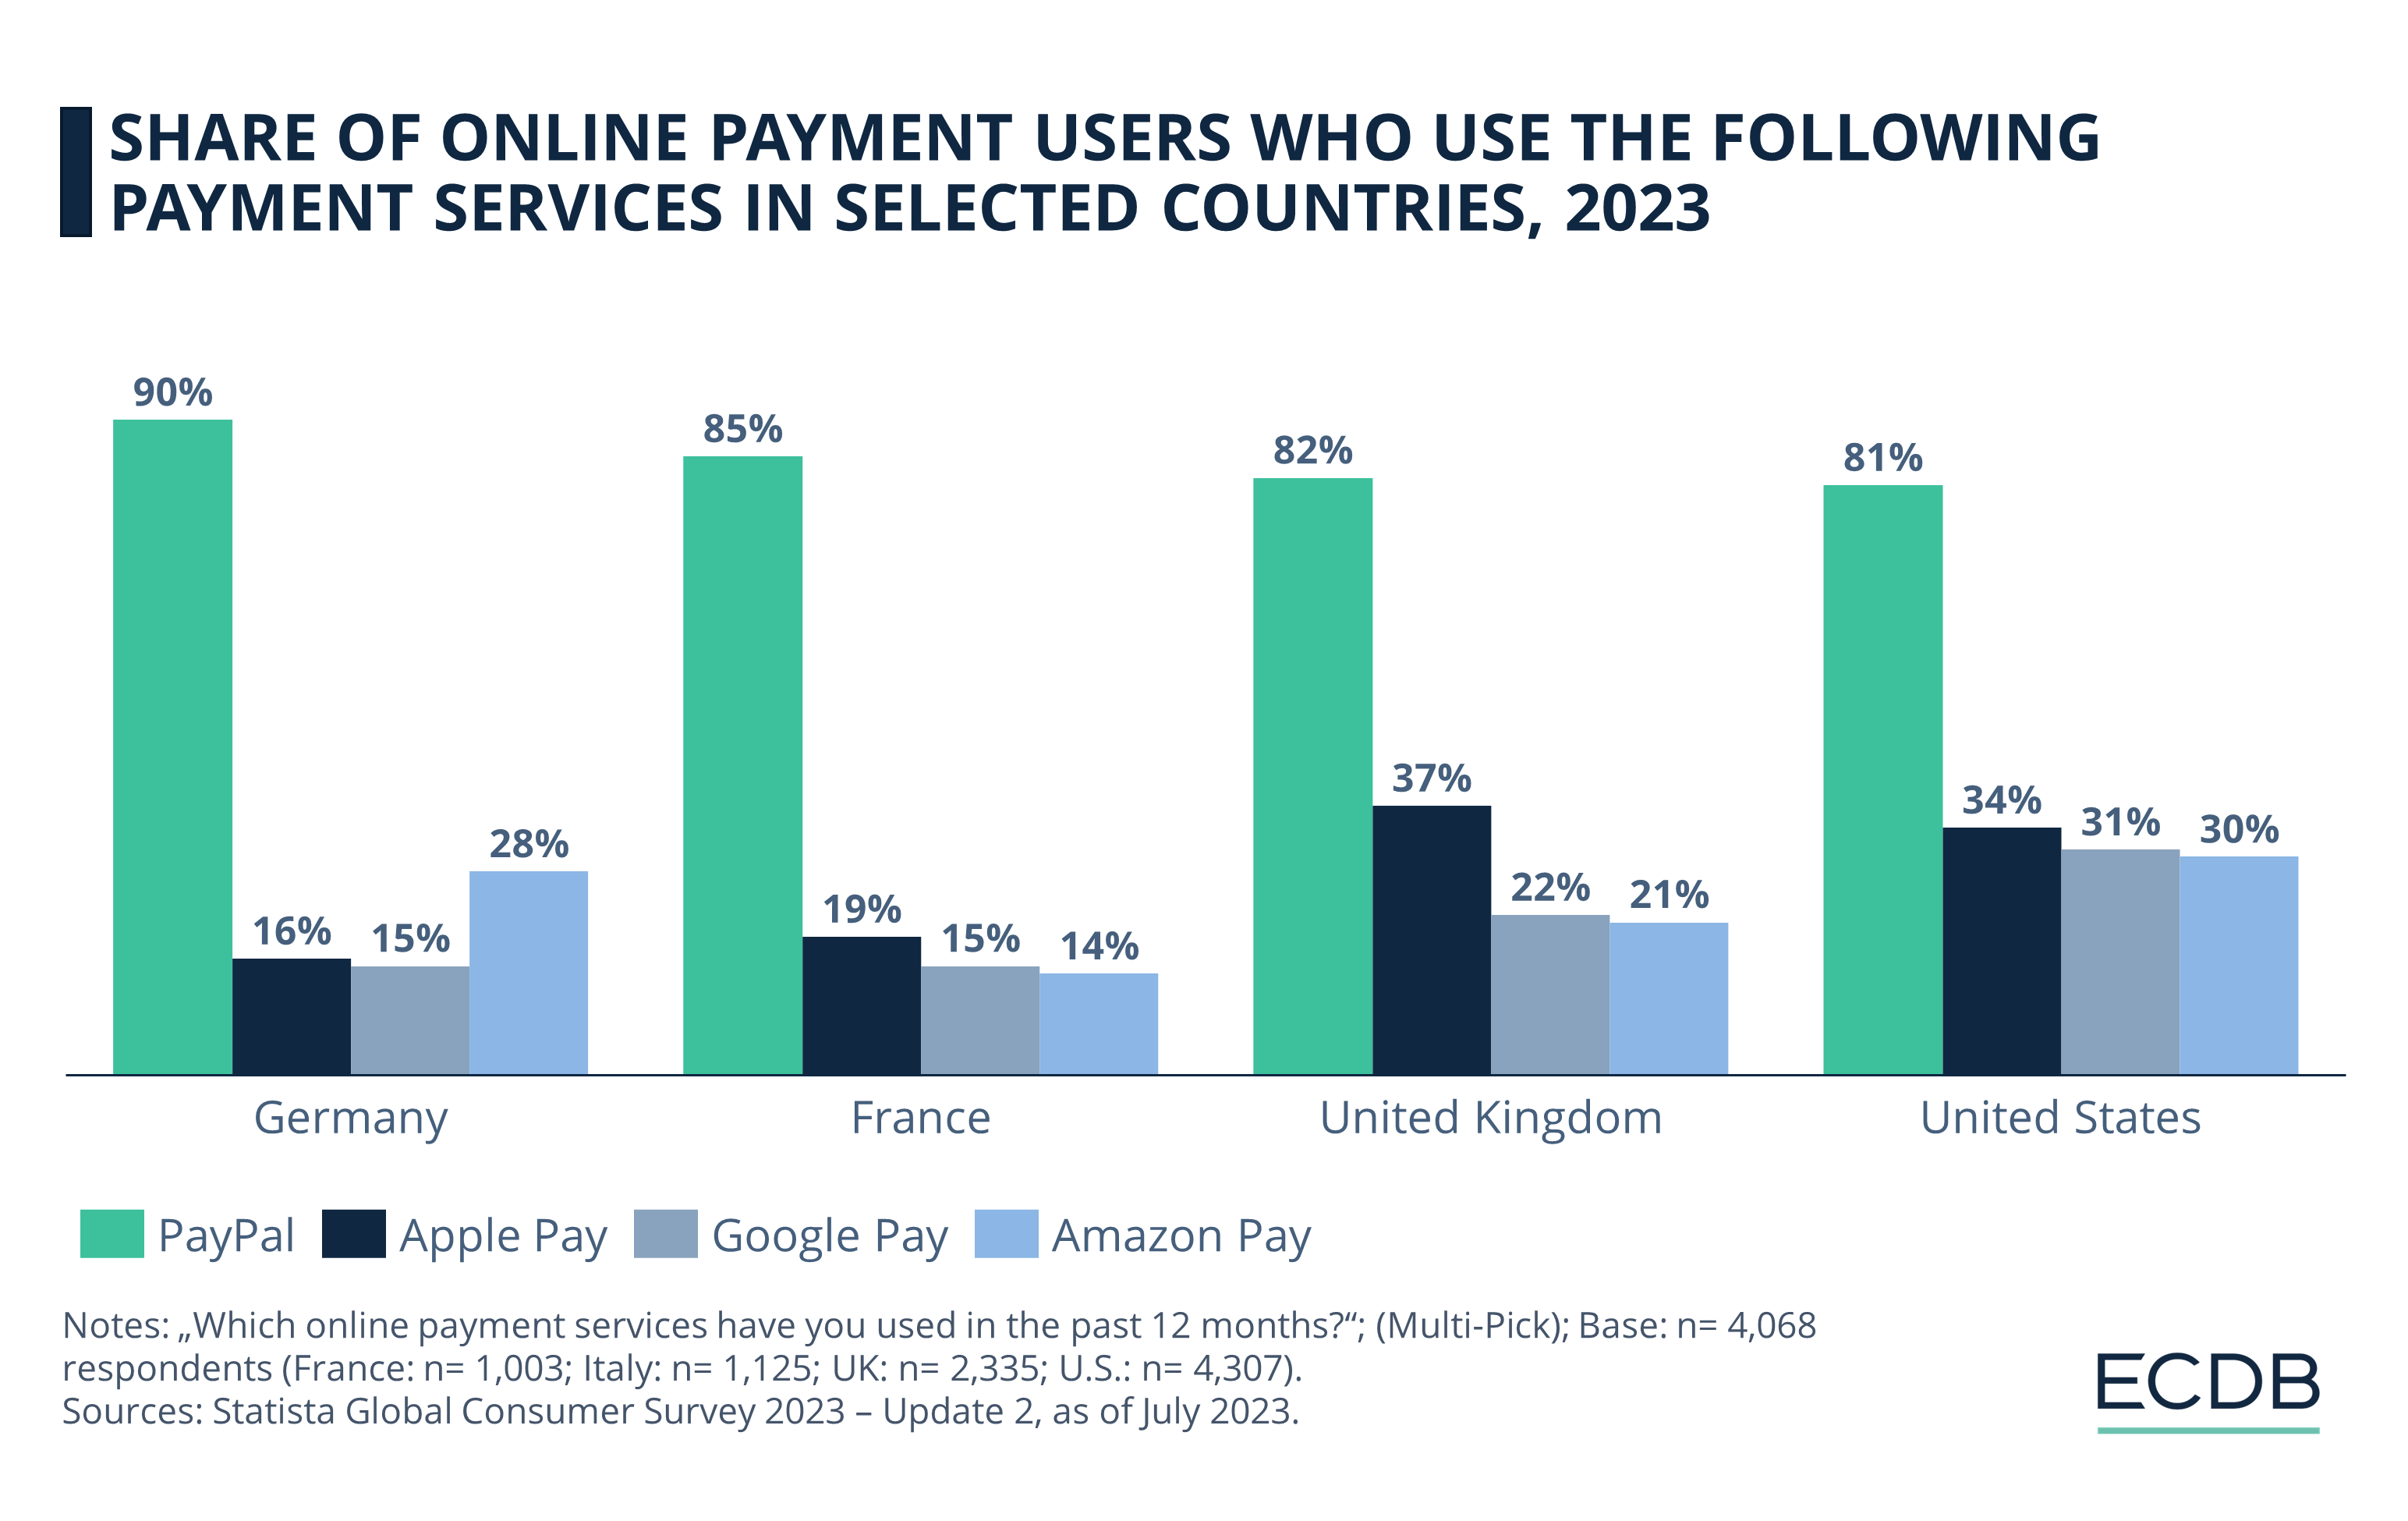 Share of Online Payment Users Who Use the Following Payment Services in Selected Countries, 2023